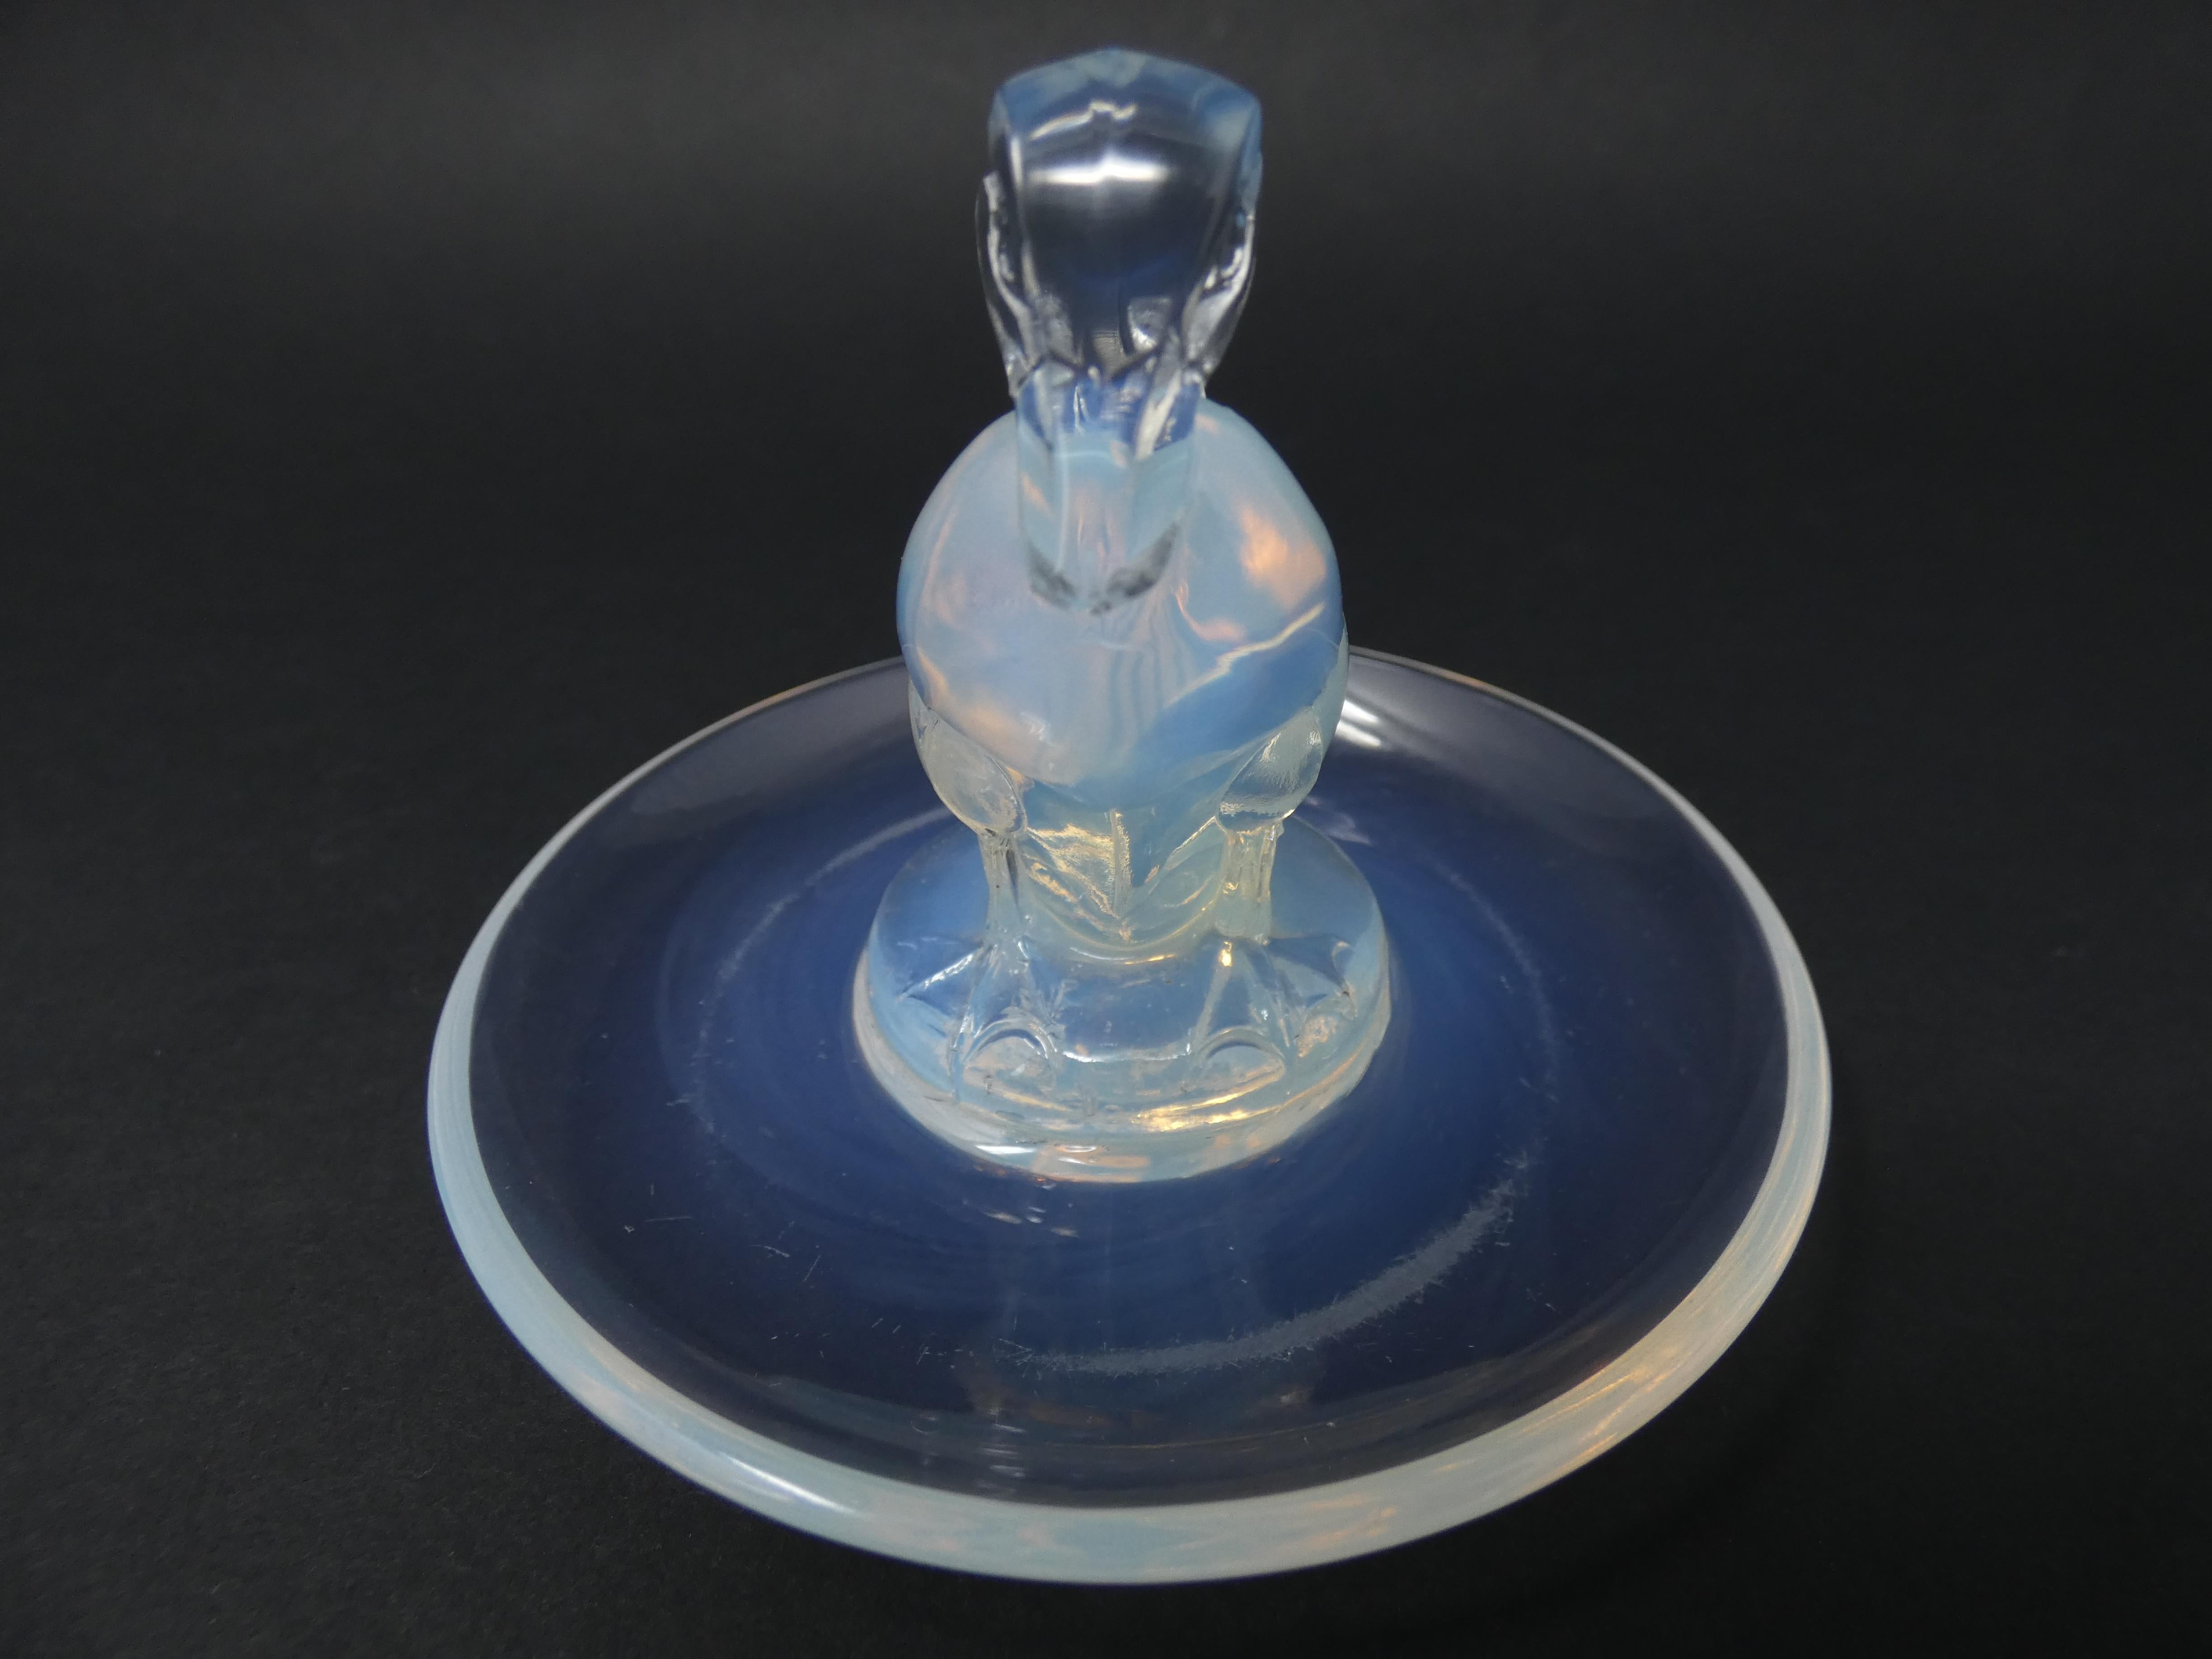 René Lalique opalescent glass 'Canard (duck)' Cendrier rond/ashtray. Engraved makers mark, 'R. Lalique France '. Book reference: Marcilhac 283.